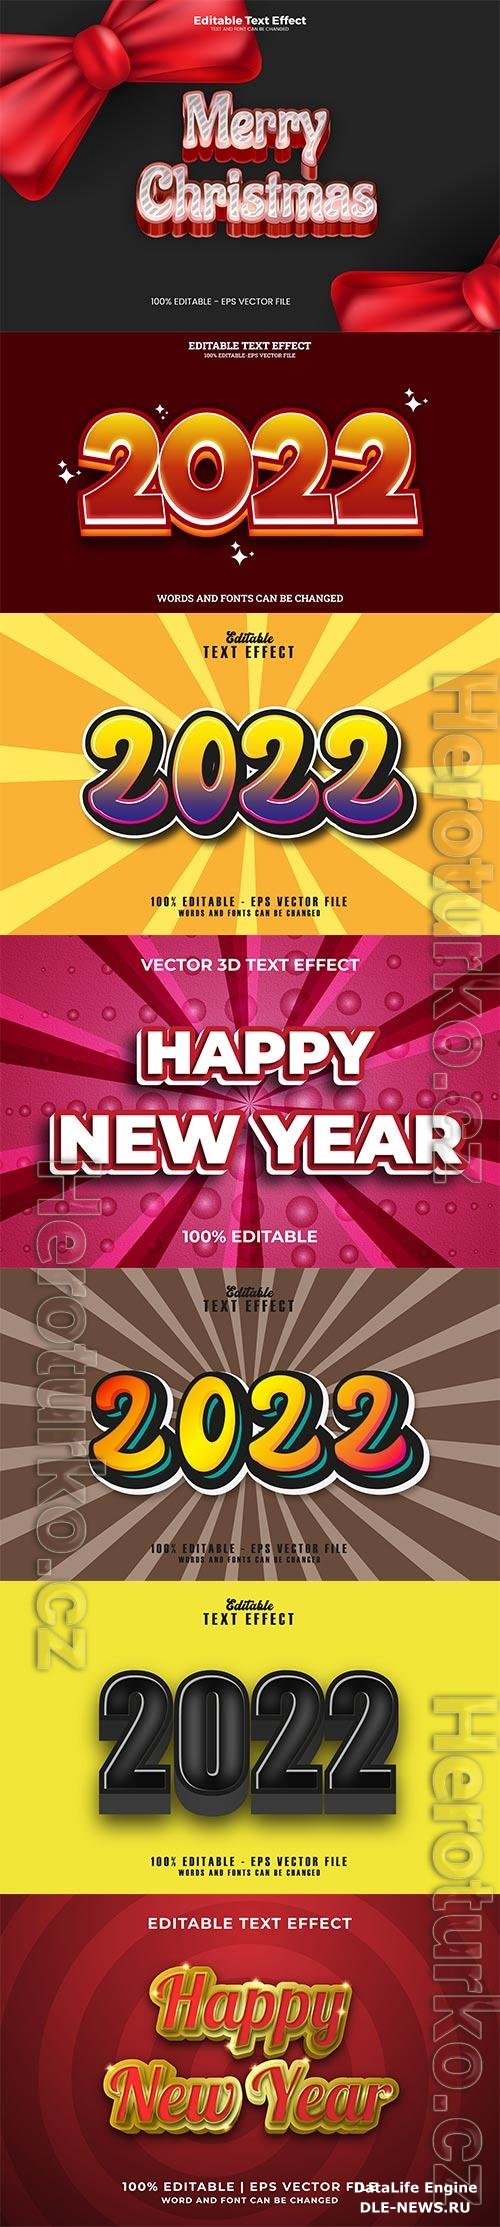 New year and christmas text effect in vector